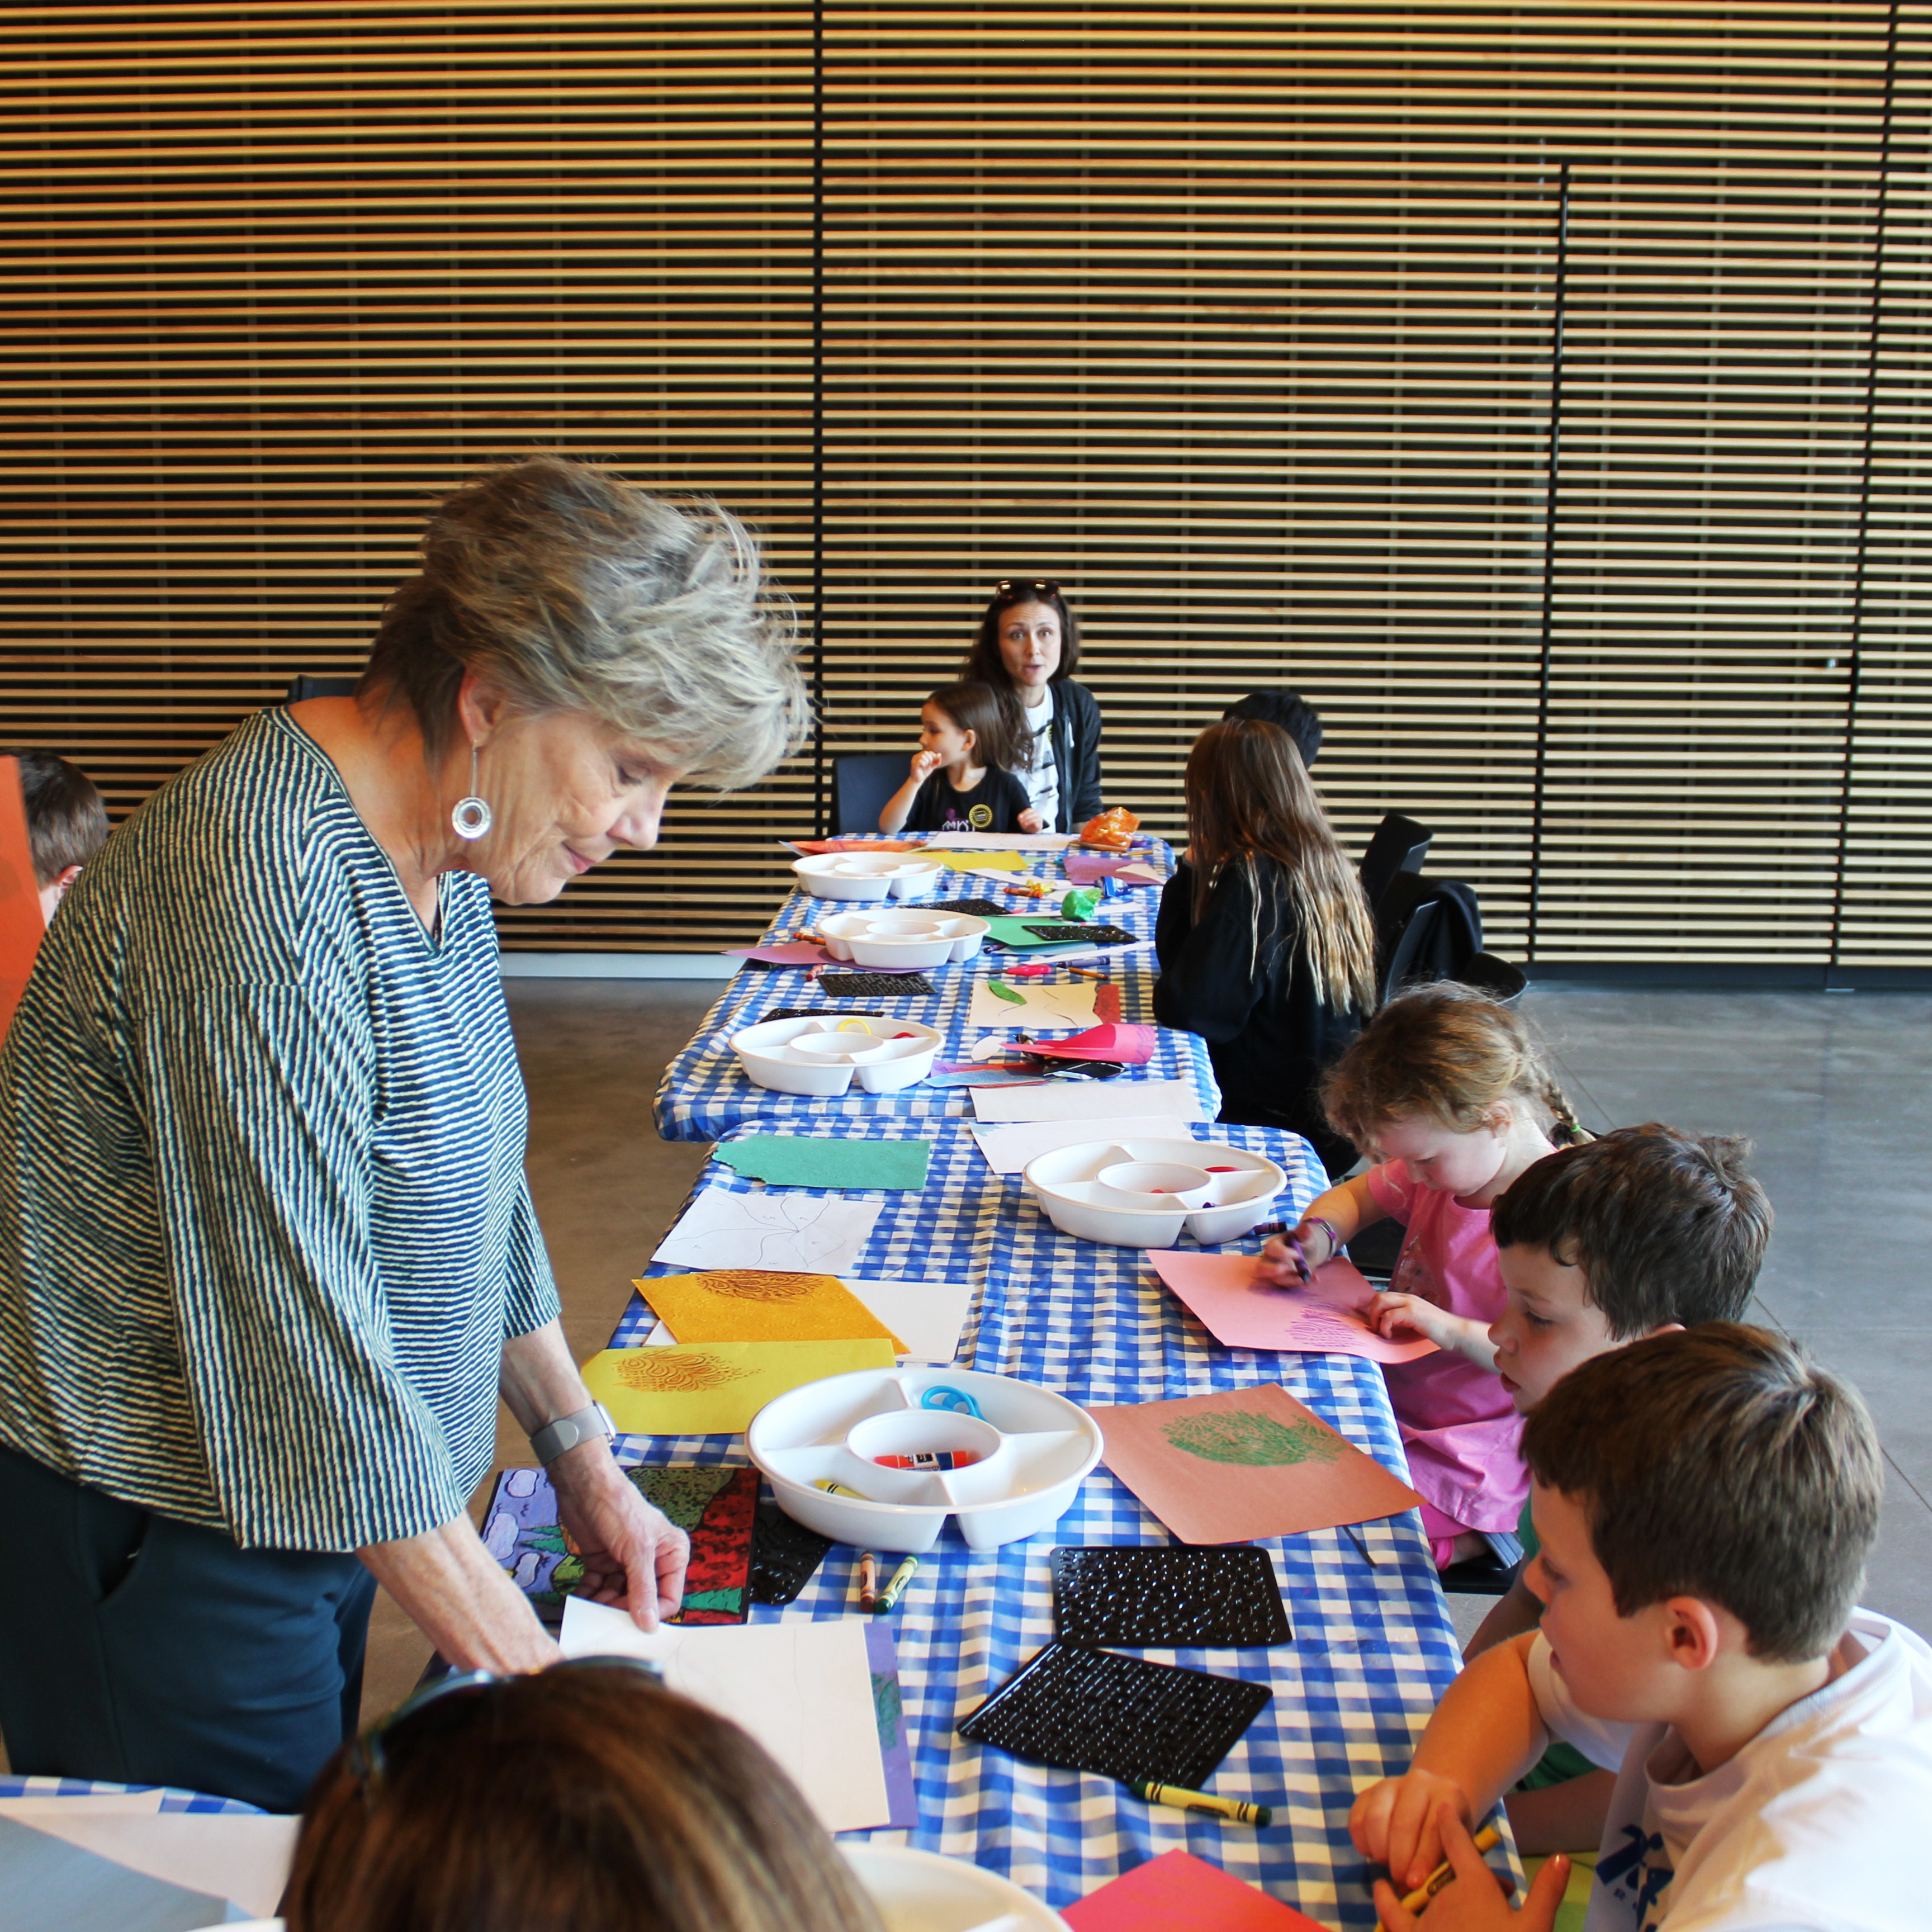 Children working on crafts at the "Schools Out at the Stanley" event